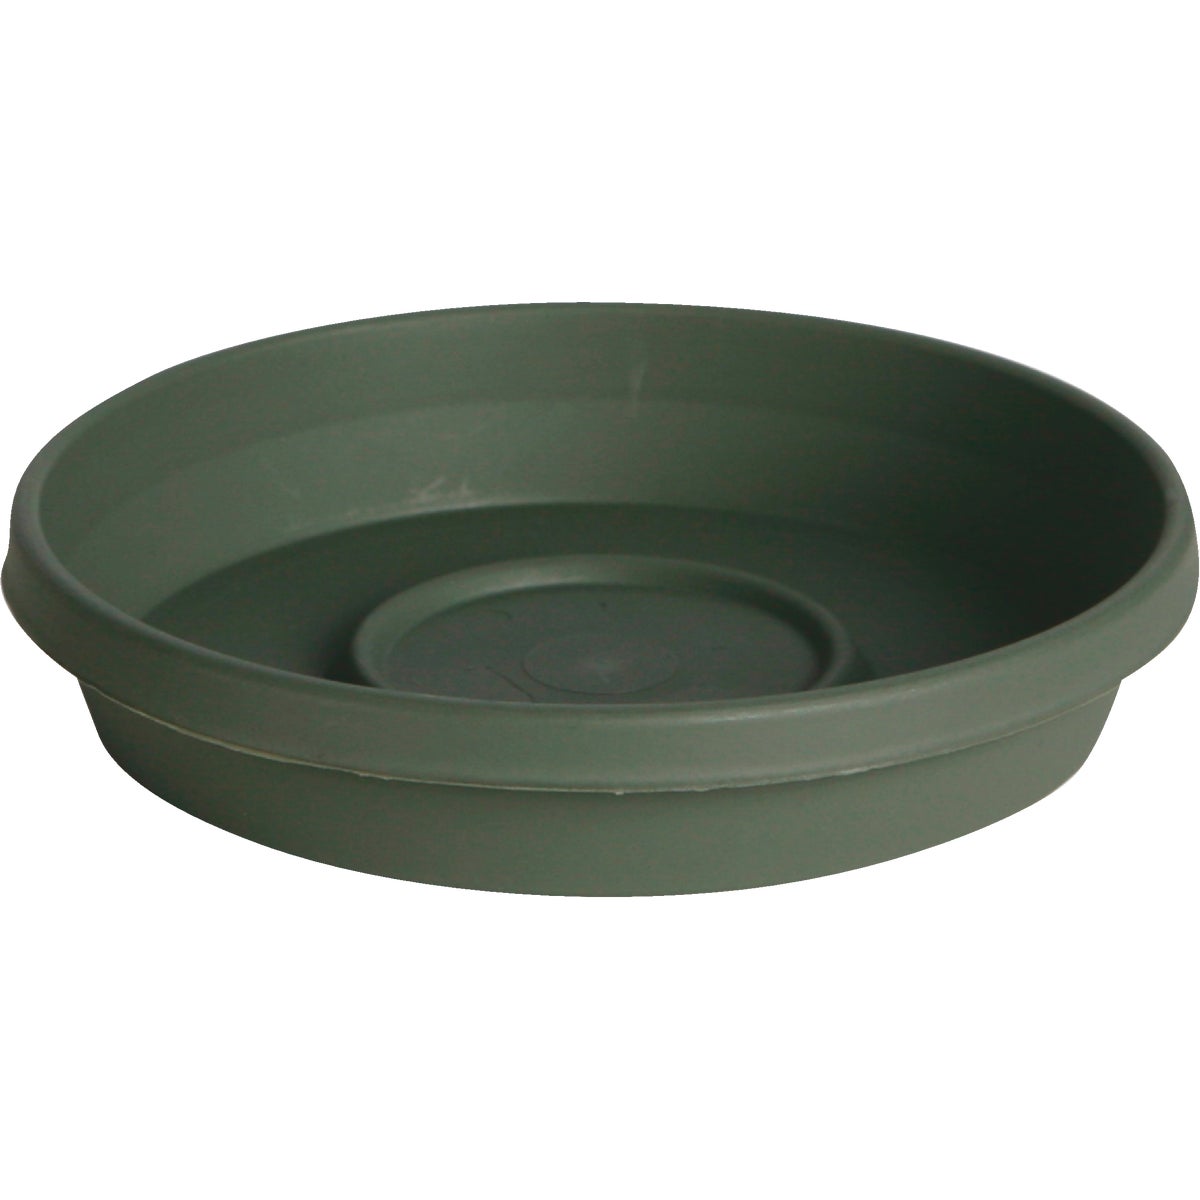 Item 709594, Round plant saucer tray. Protects surfaces from water damage.